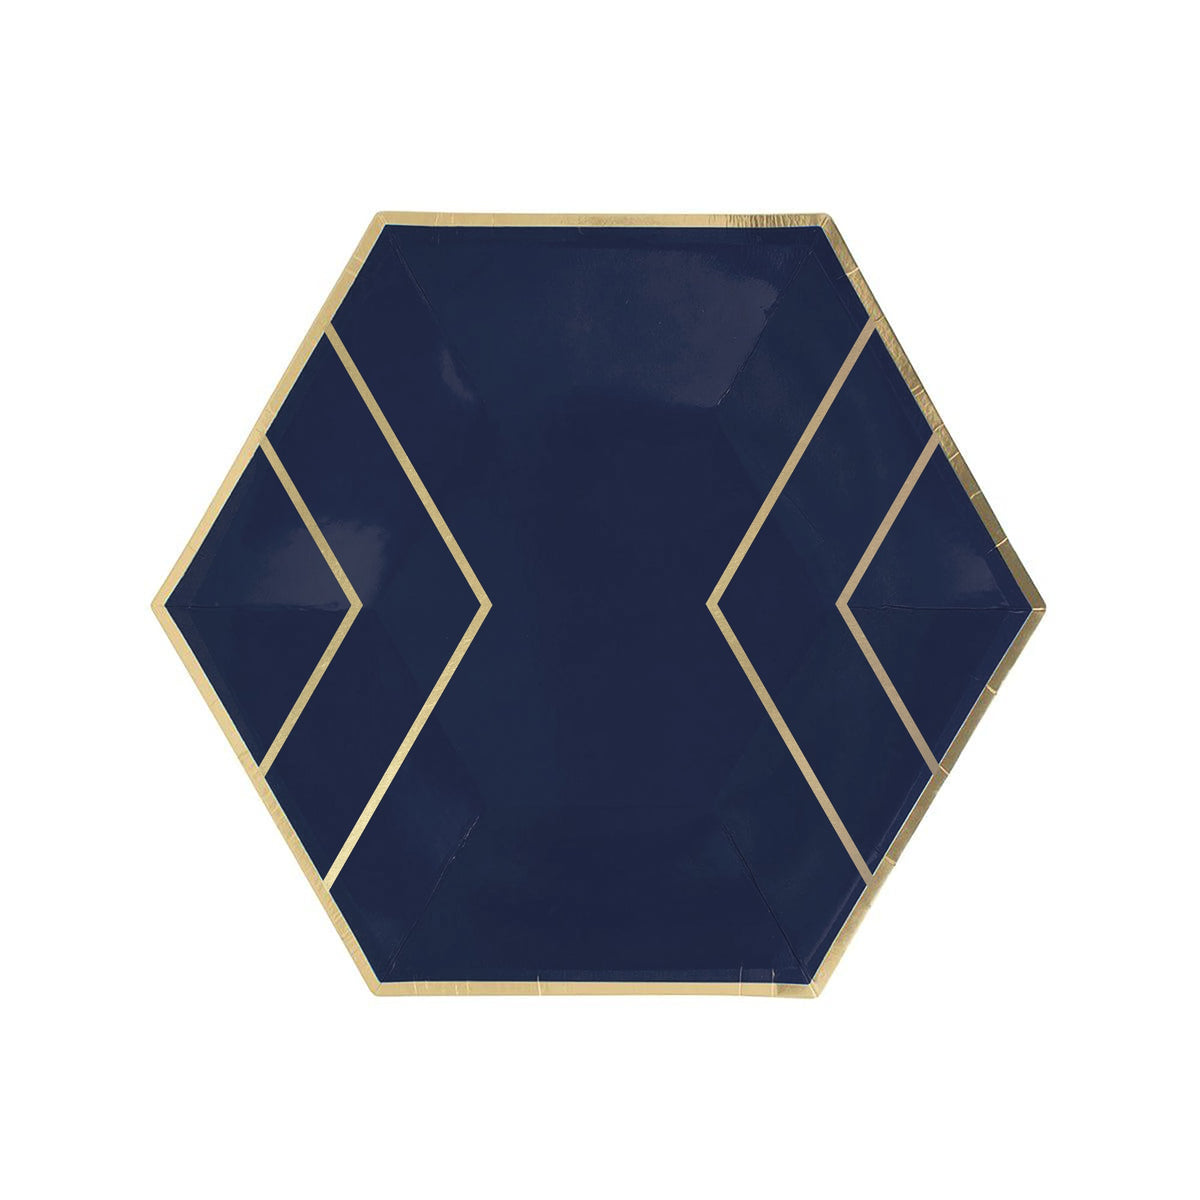 YIWU SANDY PAPER PRODUCTS CO., LTD Everyday Entertaining Small Hexagon Shaped Dessert Paper Plates, Navy Blue and Gold, 7 Inches, 8 Count 810120711928